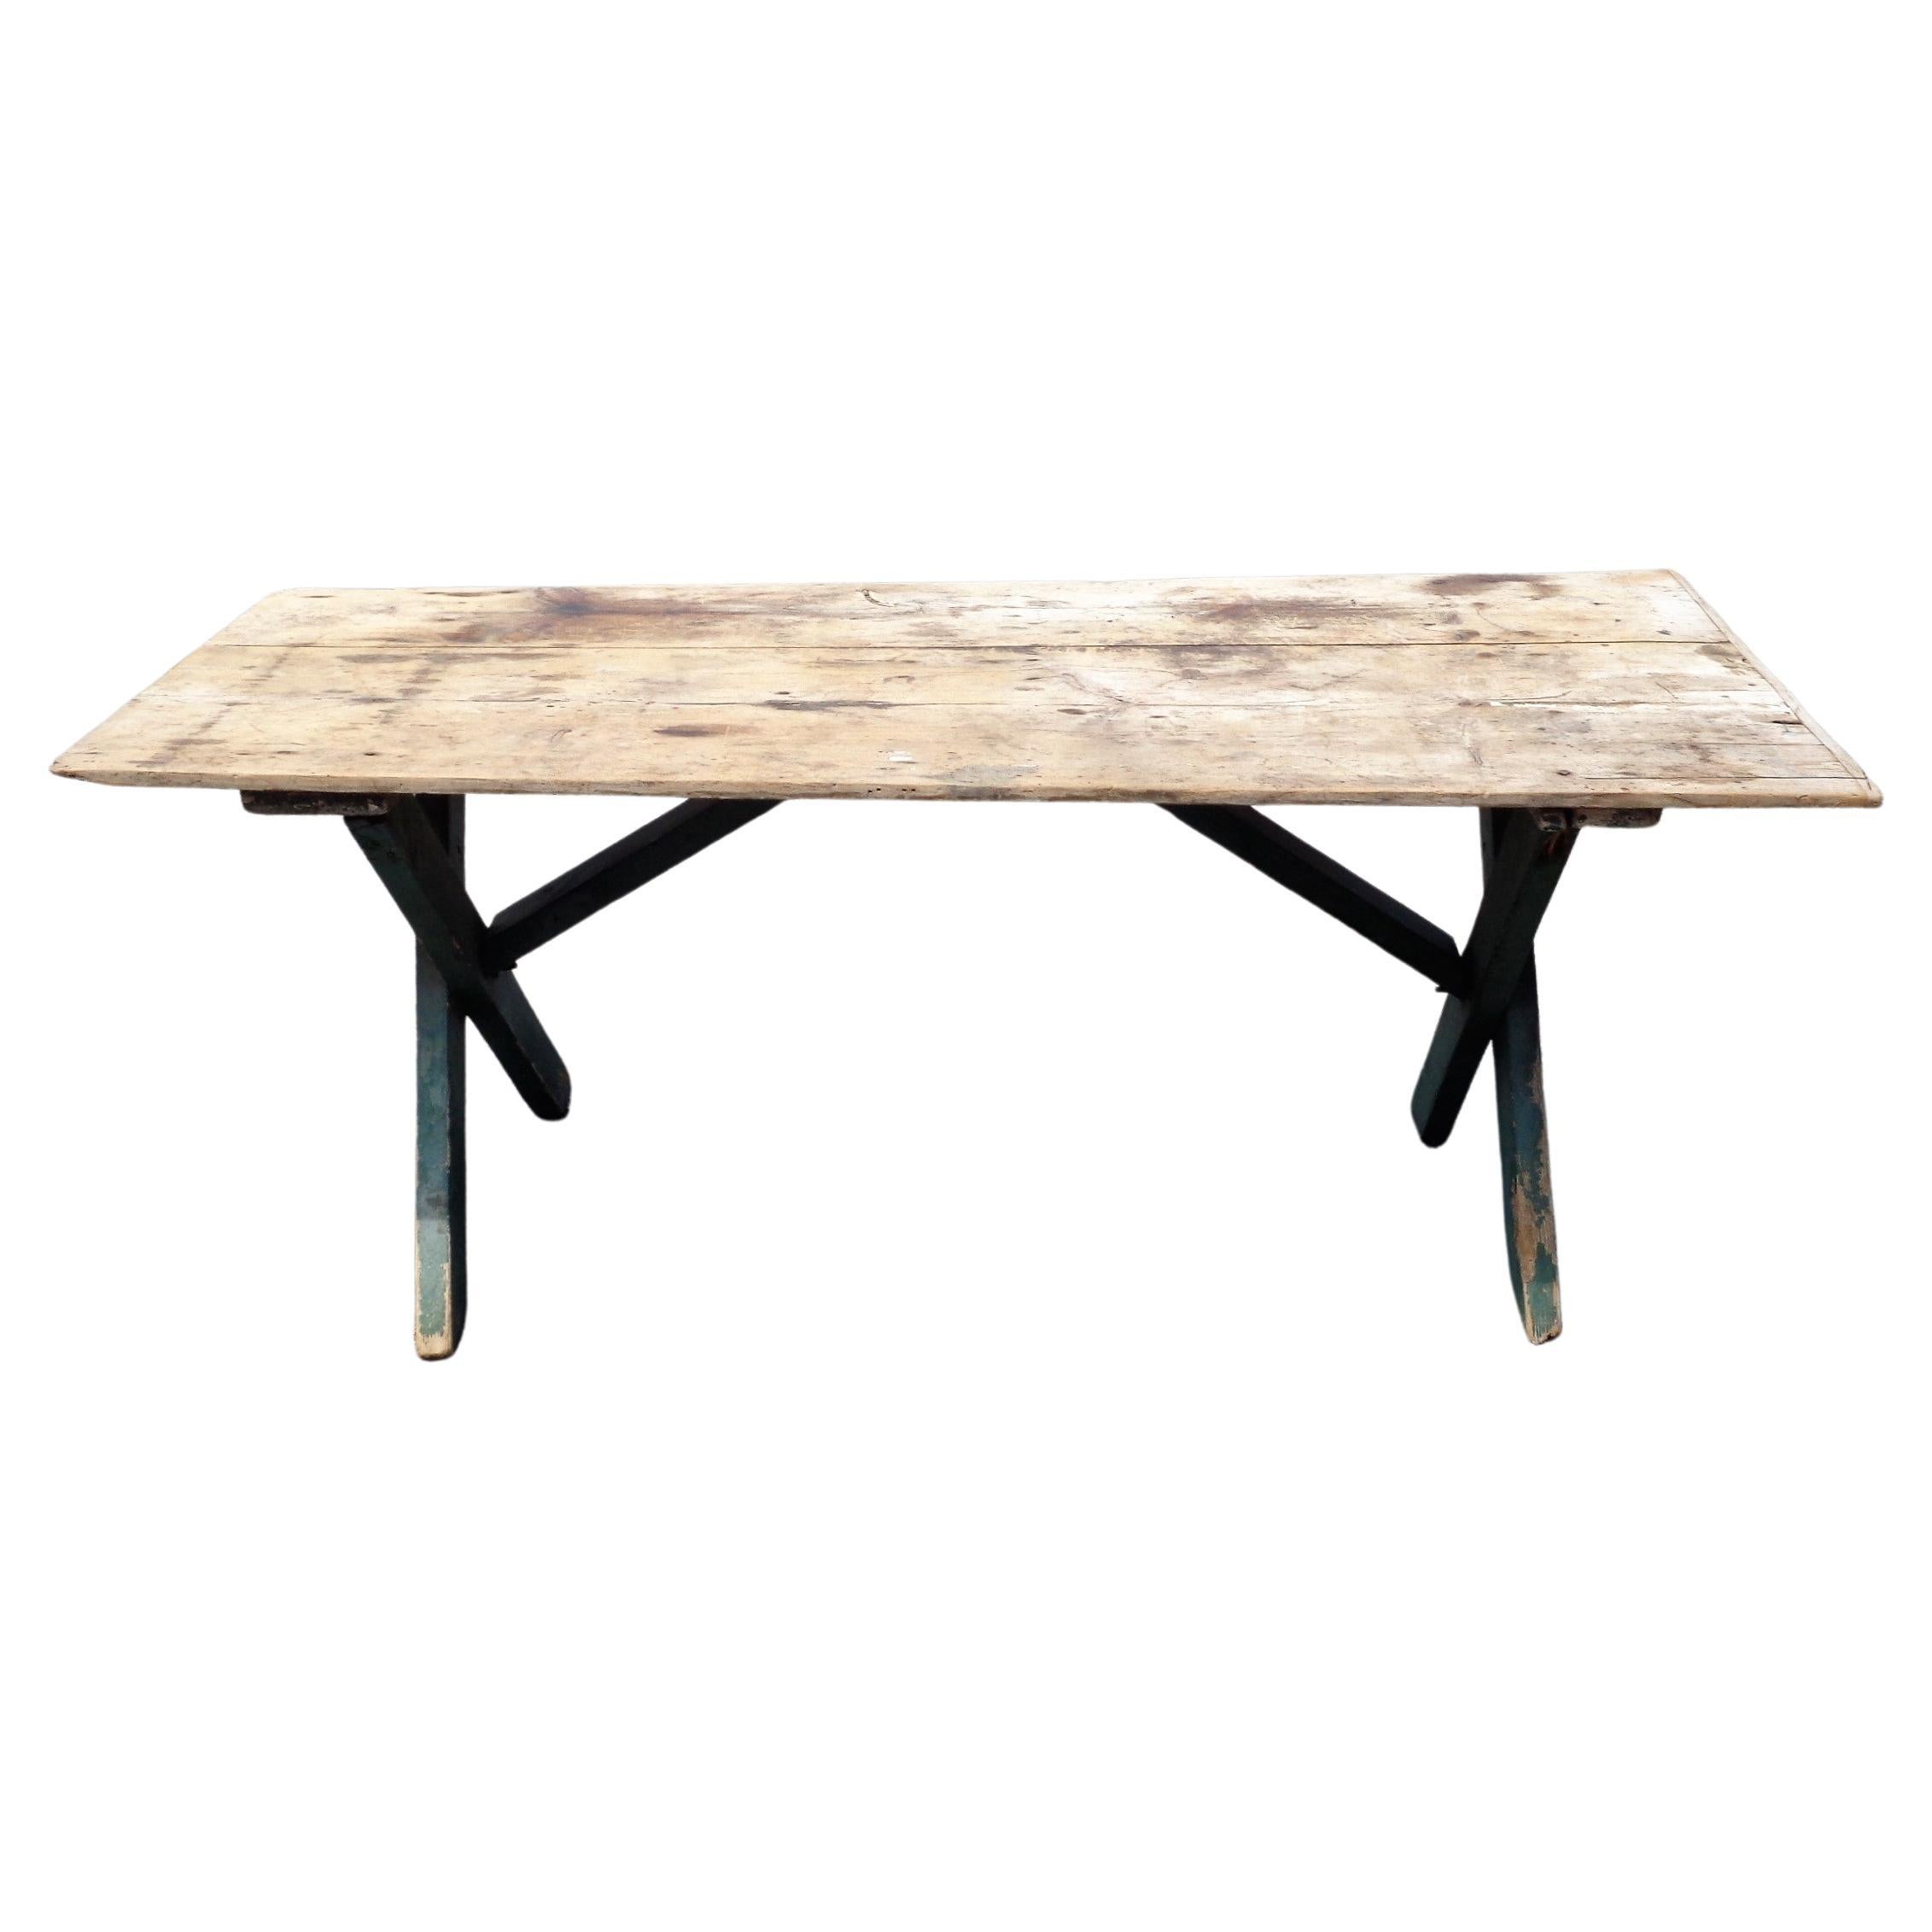 Hand-Crafted 19th Century American Country Sawbuck Dining Table Original Paint For Sale